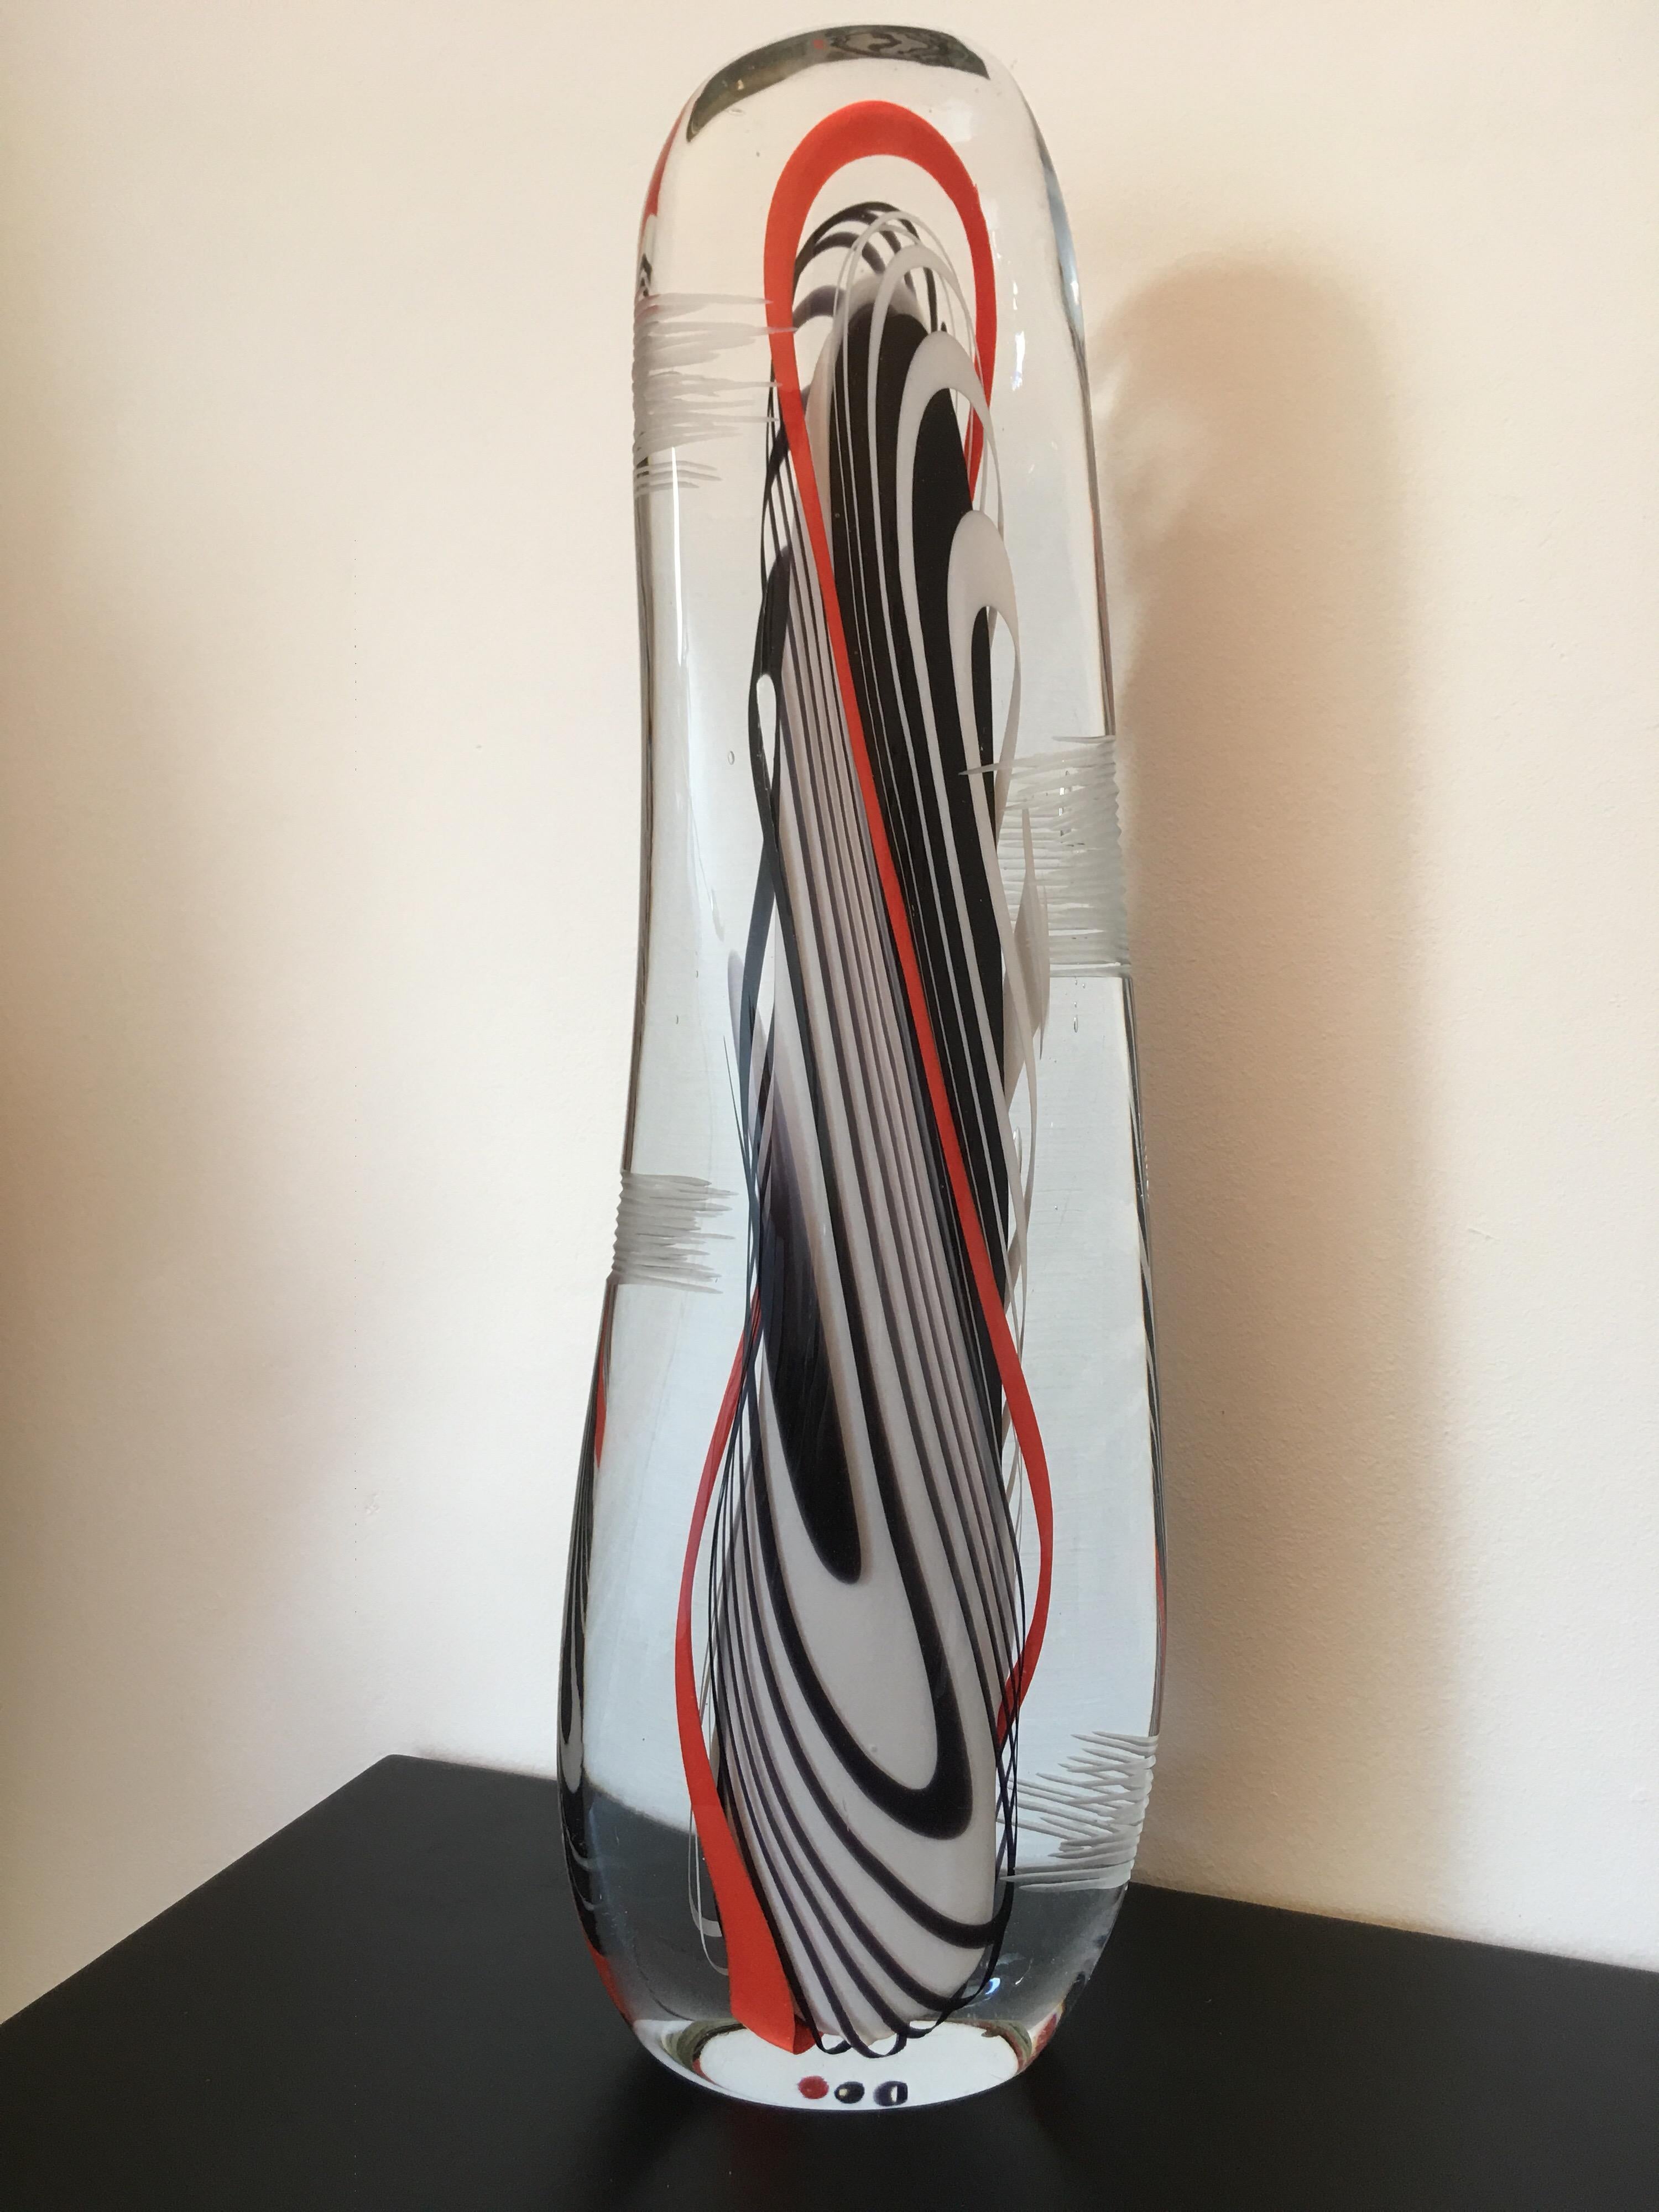 Mid-Century Modern Flavio Poli Signed Large Art Glass Sculpture, Abstract Form, Italy 1979 For Sale